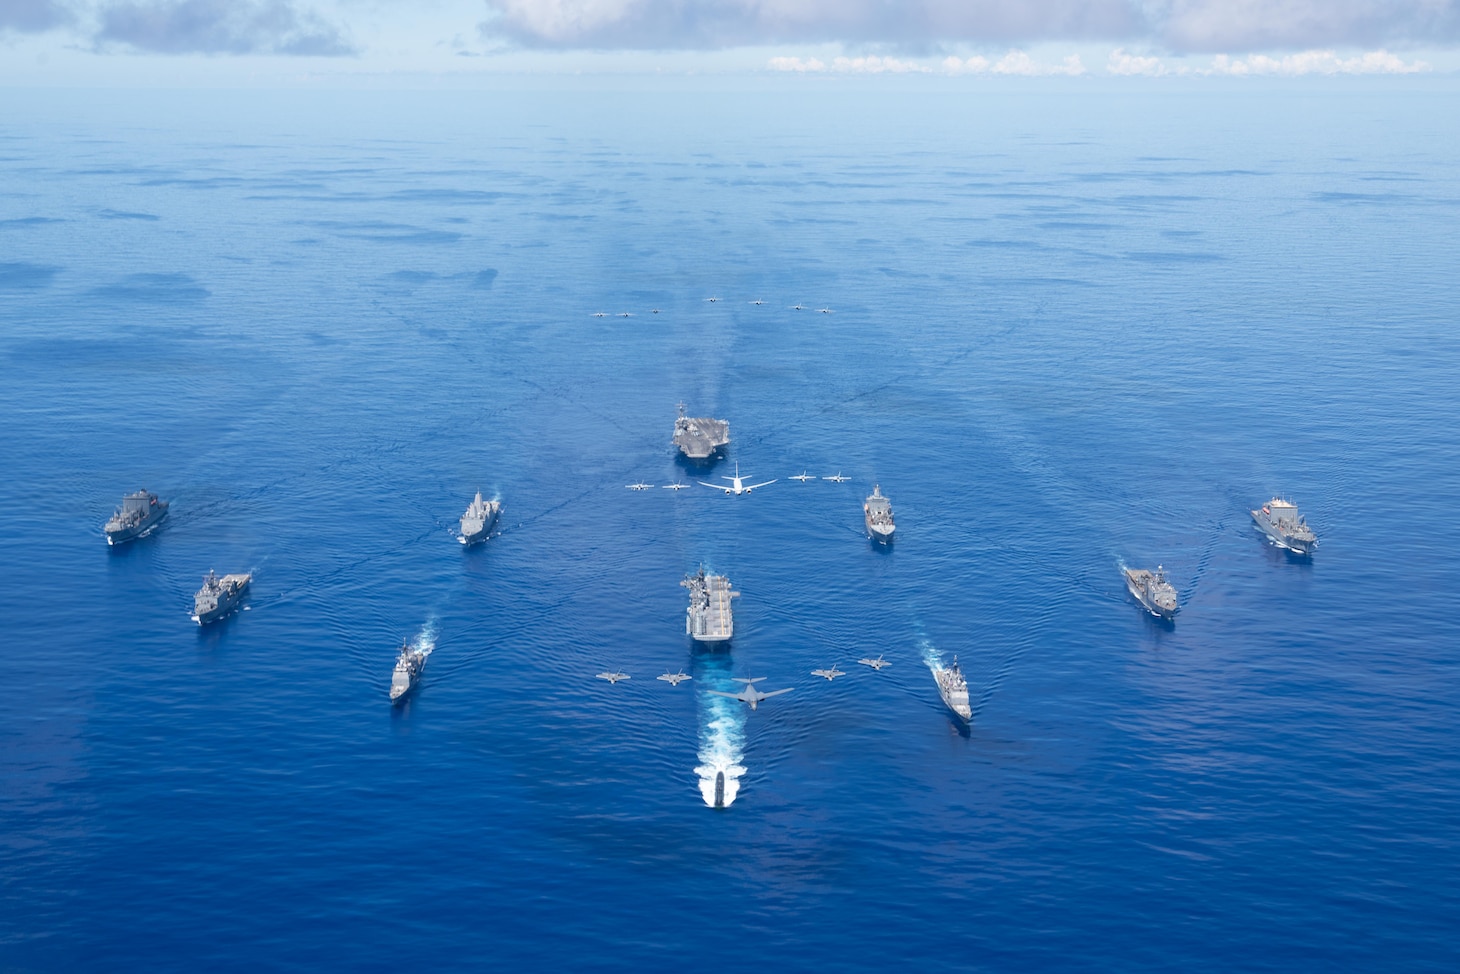 PHILIPPINE SEA (Sept. 25, 2020) From left, USNS Charles Drew (T-AKE 10), USS Comstock (LSD 45), USS Shiloh (CG 67), USS New Orleans (LPD 18), USS Chicago (SSN 721), USS America (LHA 6), USS Ronald Reagan (CVN 76), USNS John Ericsson (T-AO 194), USS Antietam (CG 54), USS Germantown (LSD 42), and USNS Sacagawea (T-AKE 2) steam in formation while E/A-18G Growlers and FA-18E Super Hornets from Carrier Air Wing (CVW) 5, a P-8 Poseidon from Commander Task Force 72,  and U.S. Air Force F-22 Raptors and  a B-1B Bomber fly over the formation in support of Valiant Shield 2020. Valiant Shield is a U.S. only, biennial field training exercise (FTX) with a focus on integration of joint training in a blue-water environment among U.S. forces. This training enables real-world proficiency in sustaining joint forces through detecting, locating, tracking and engaging units at sea, in the air, on land and in cyberspace in response to a range of mission areas. (U.S. Navy photo by Mass Communication Specialist 3rd Class Jason Tarleton)